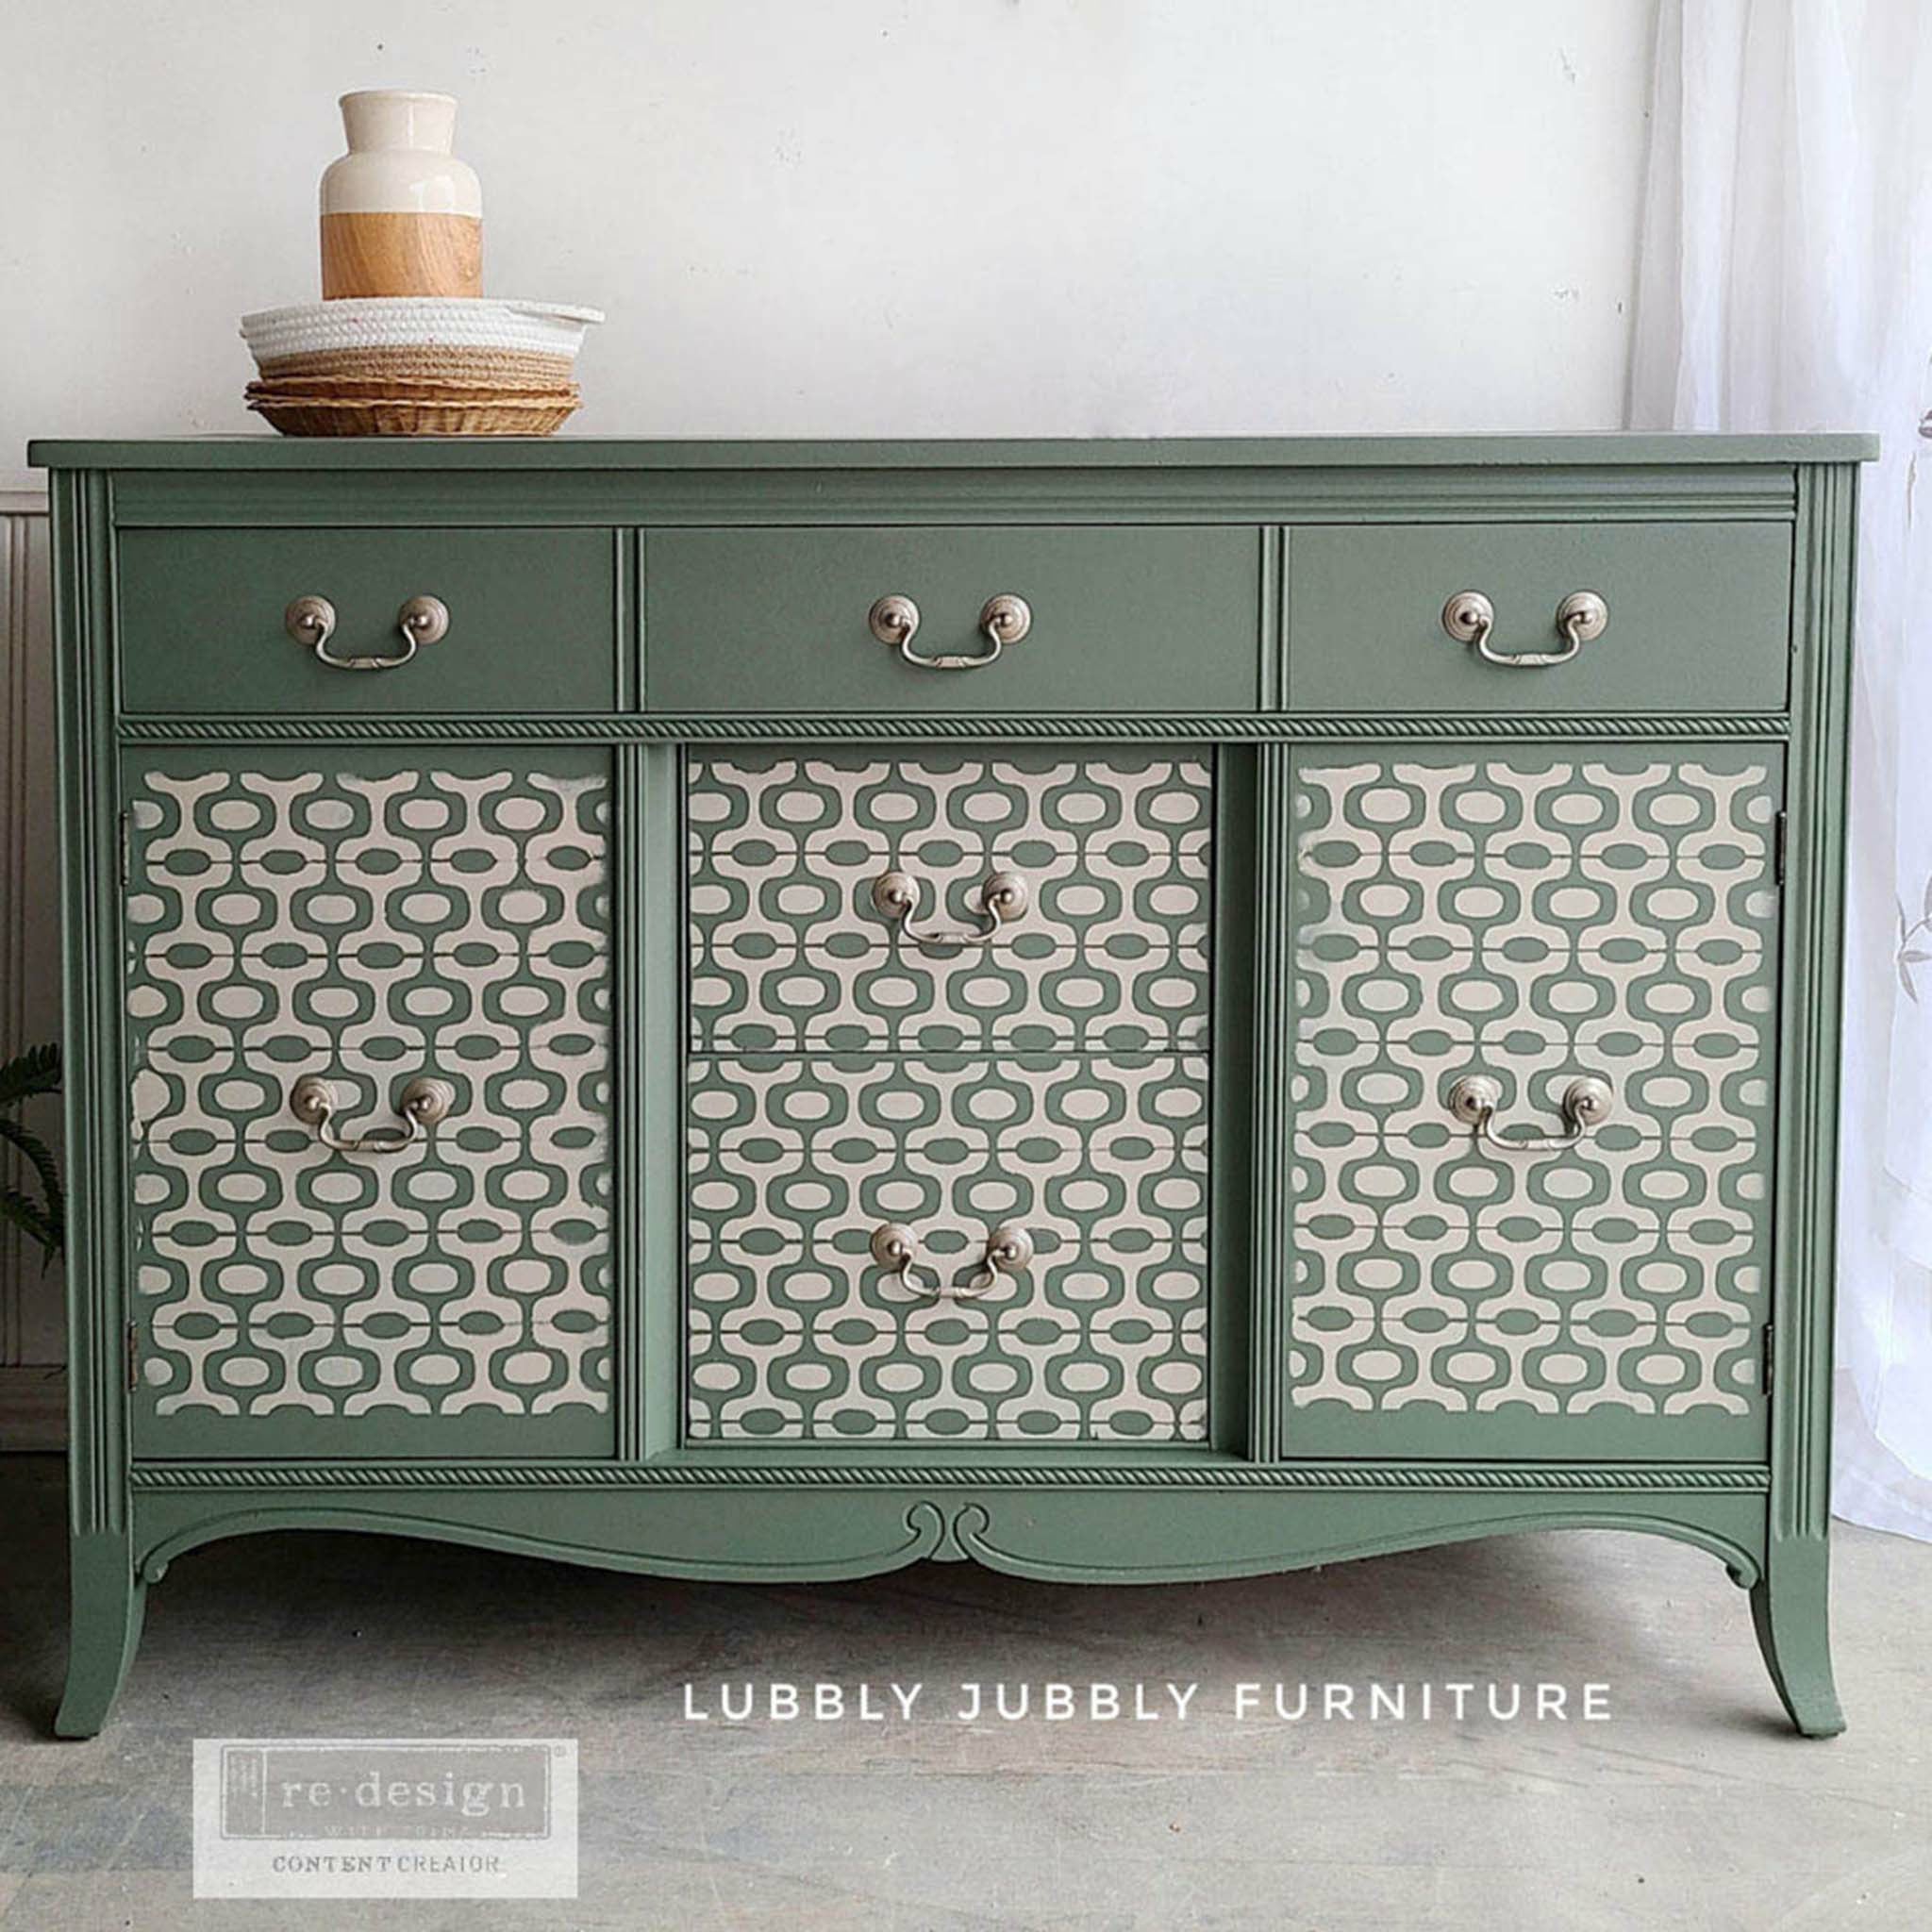 Muted green dresser with the Midcentury Vibes stencil on the front. A white Lubbly Jubbly Furniture and Redesign content creator logo on the bottom.